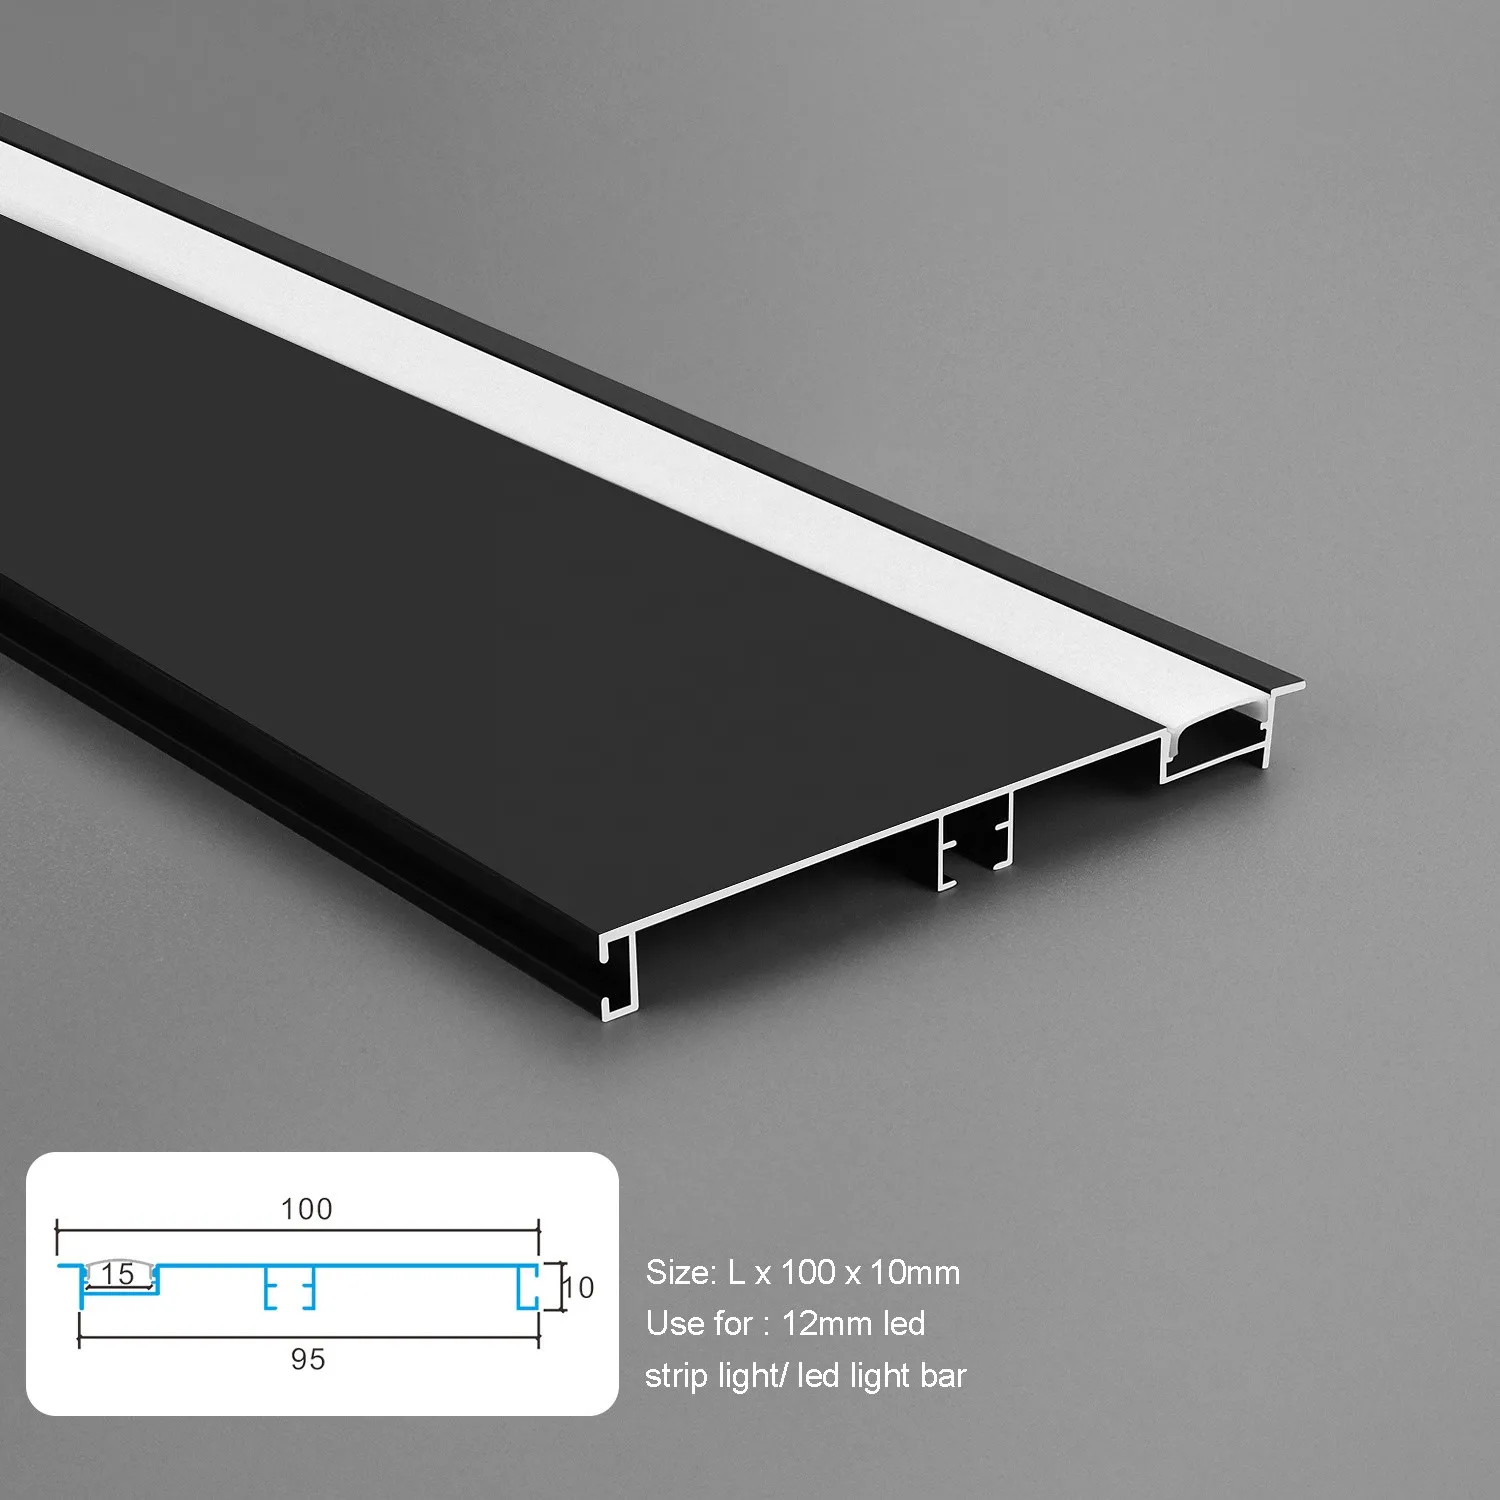 

1.5m/pcs high quality Customized Skirting Board with LED Channel is Used for Lighting the Foundation Line of Corridor wall